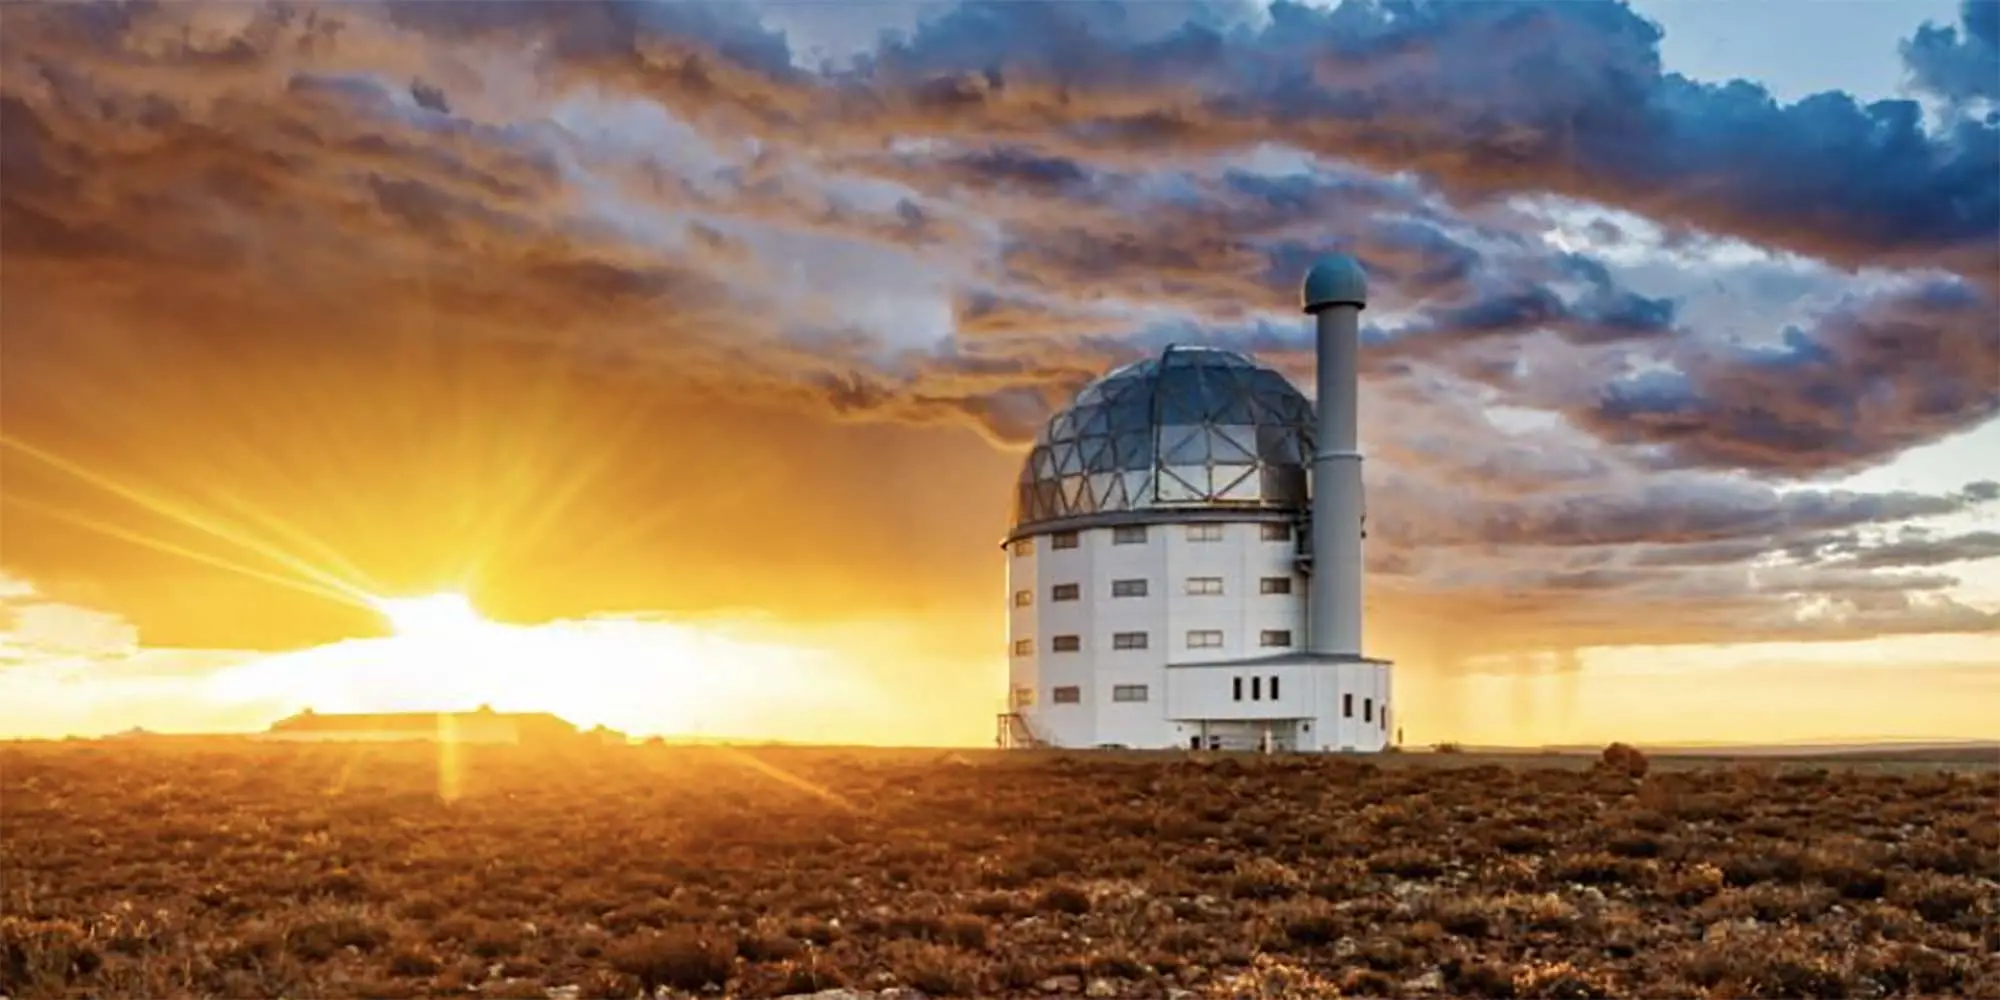 The South African Large Telescope is one of the most recent instruments that researchers at the McWilliams Center for Cosmology and Astrophysics have access to for collecting data.